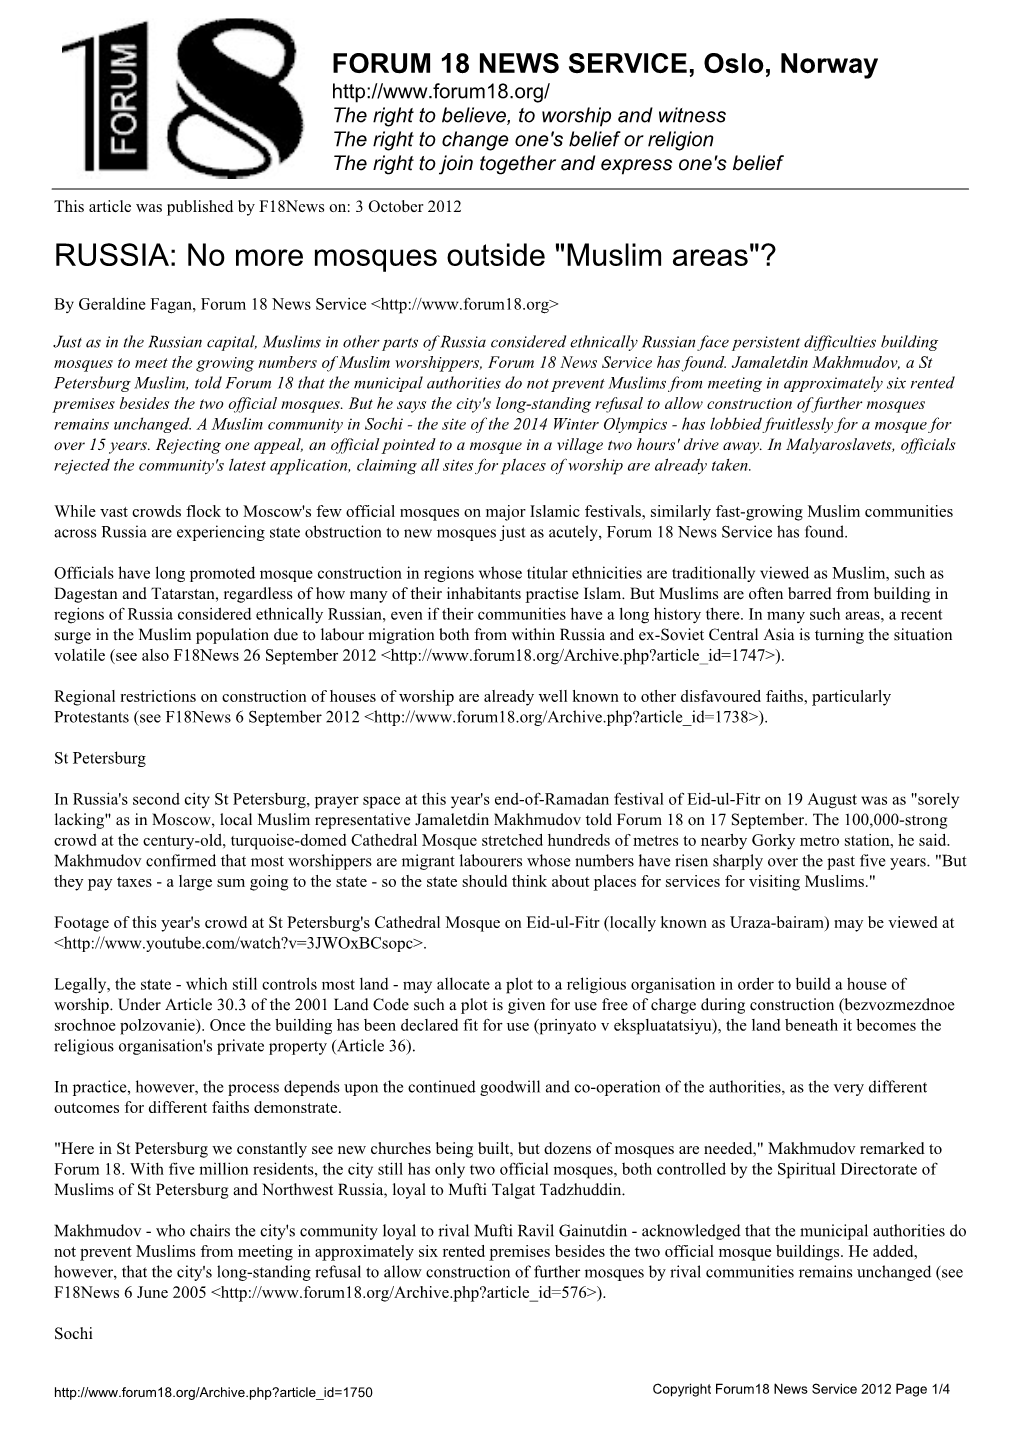 RUSSIA: No More Mosques Outside "Muslim Areas"?